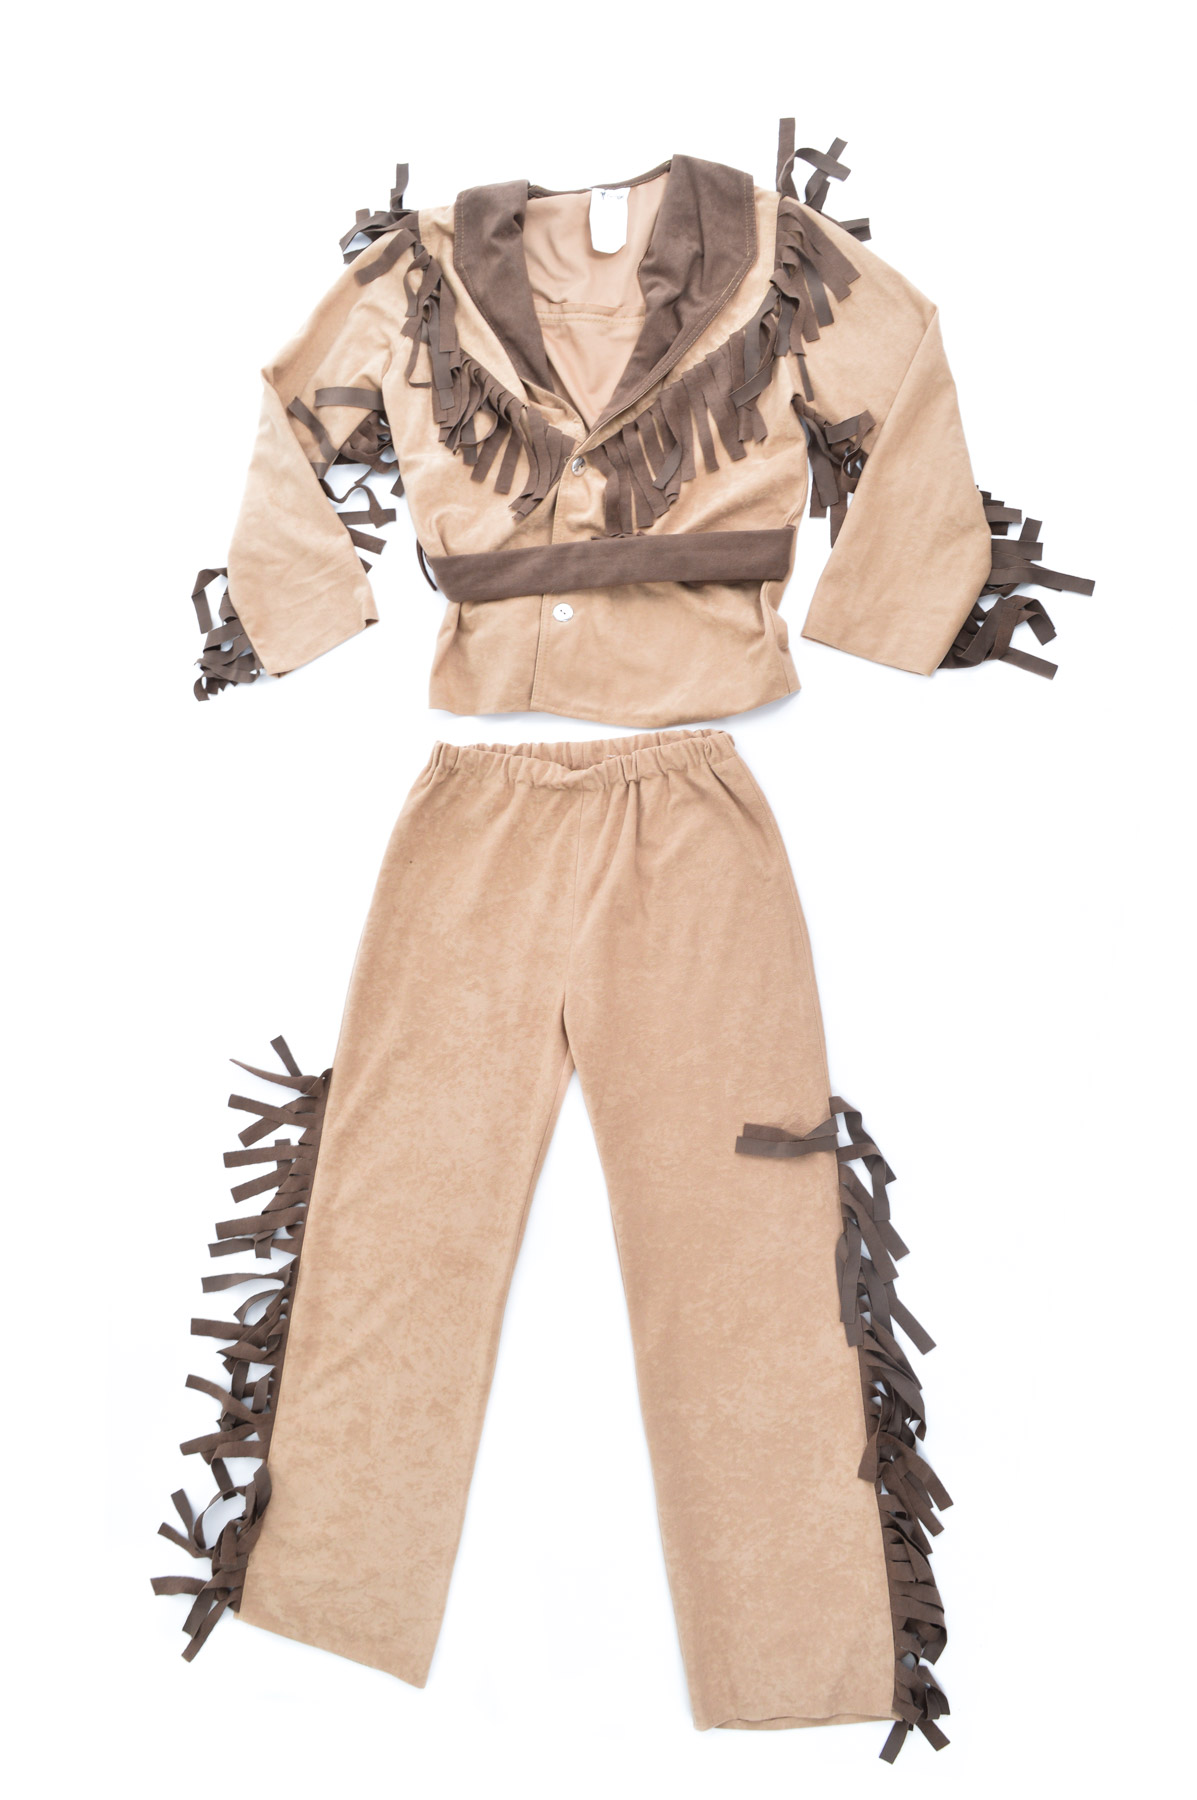 Carnival costume for Kids - Party Lits - 0